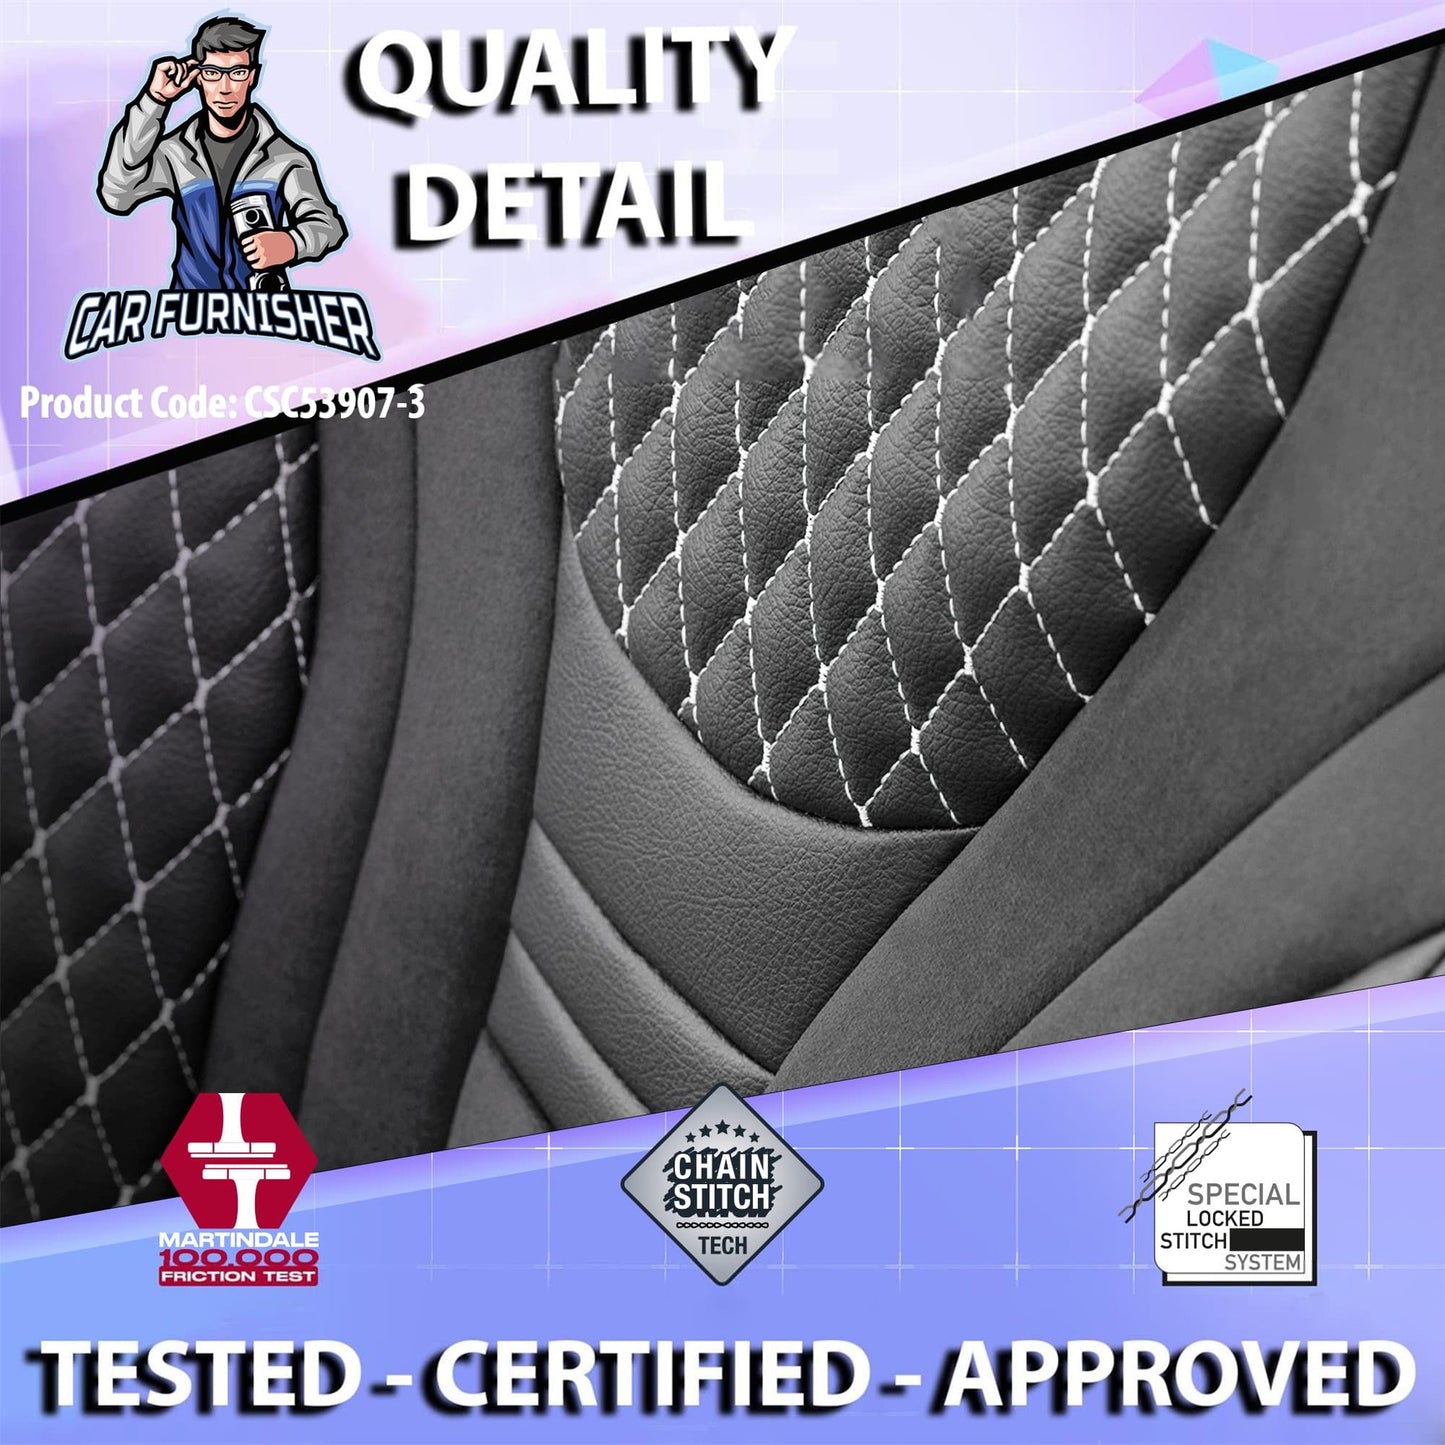 Car Seat Cover Set - Infinity Design Gray 5 Seats + Headrests (Full Set) Leather & Suede Fabric